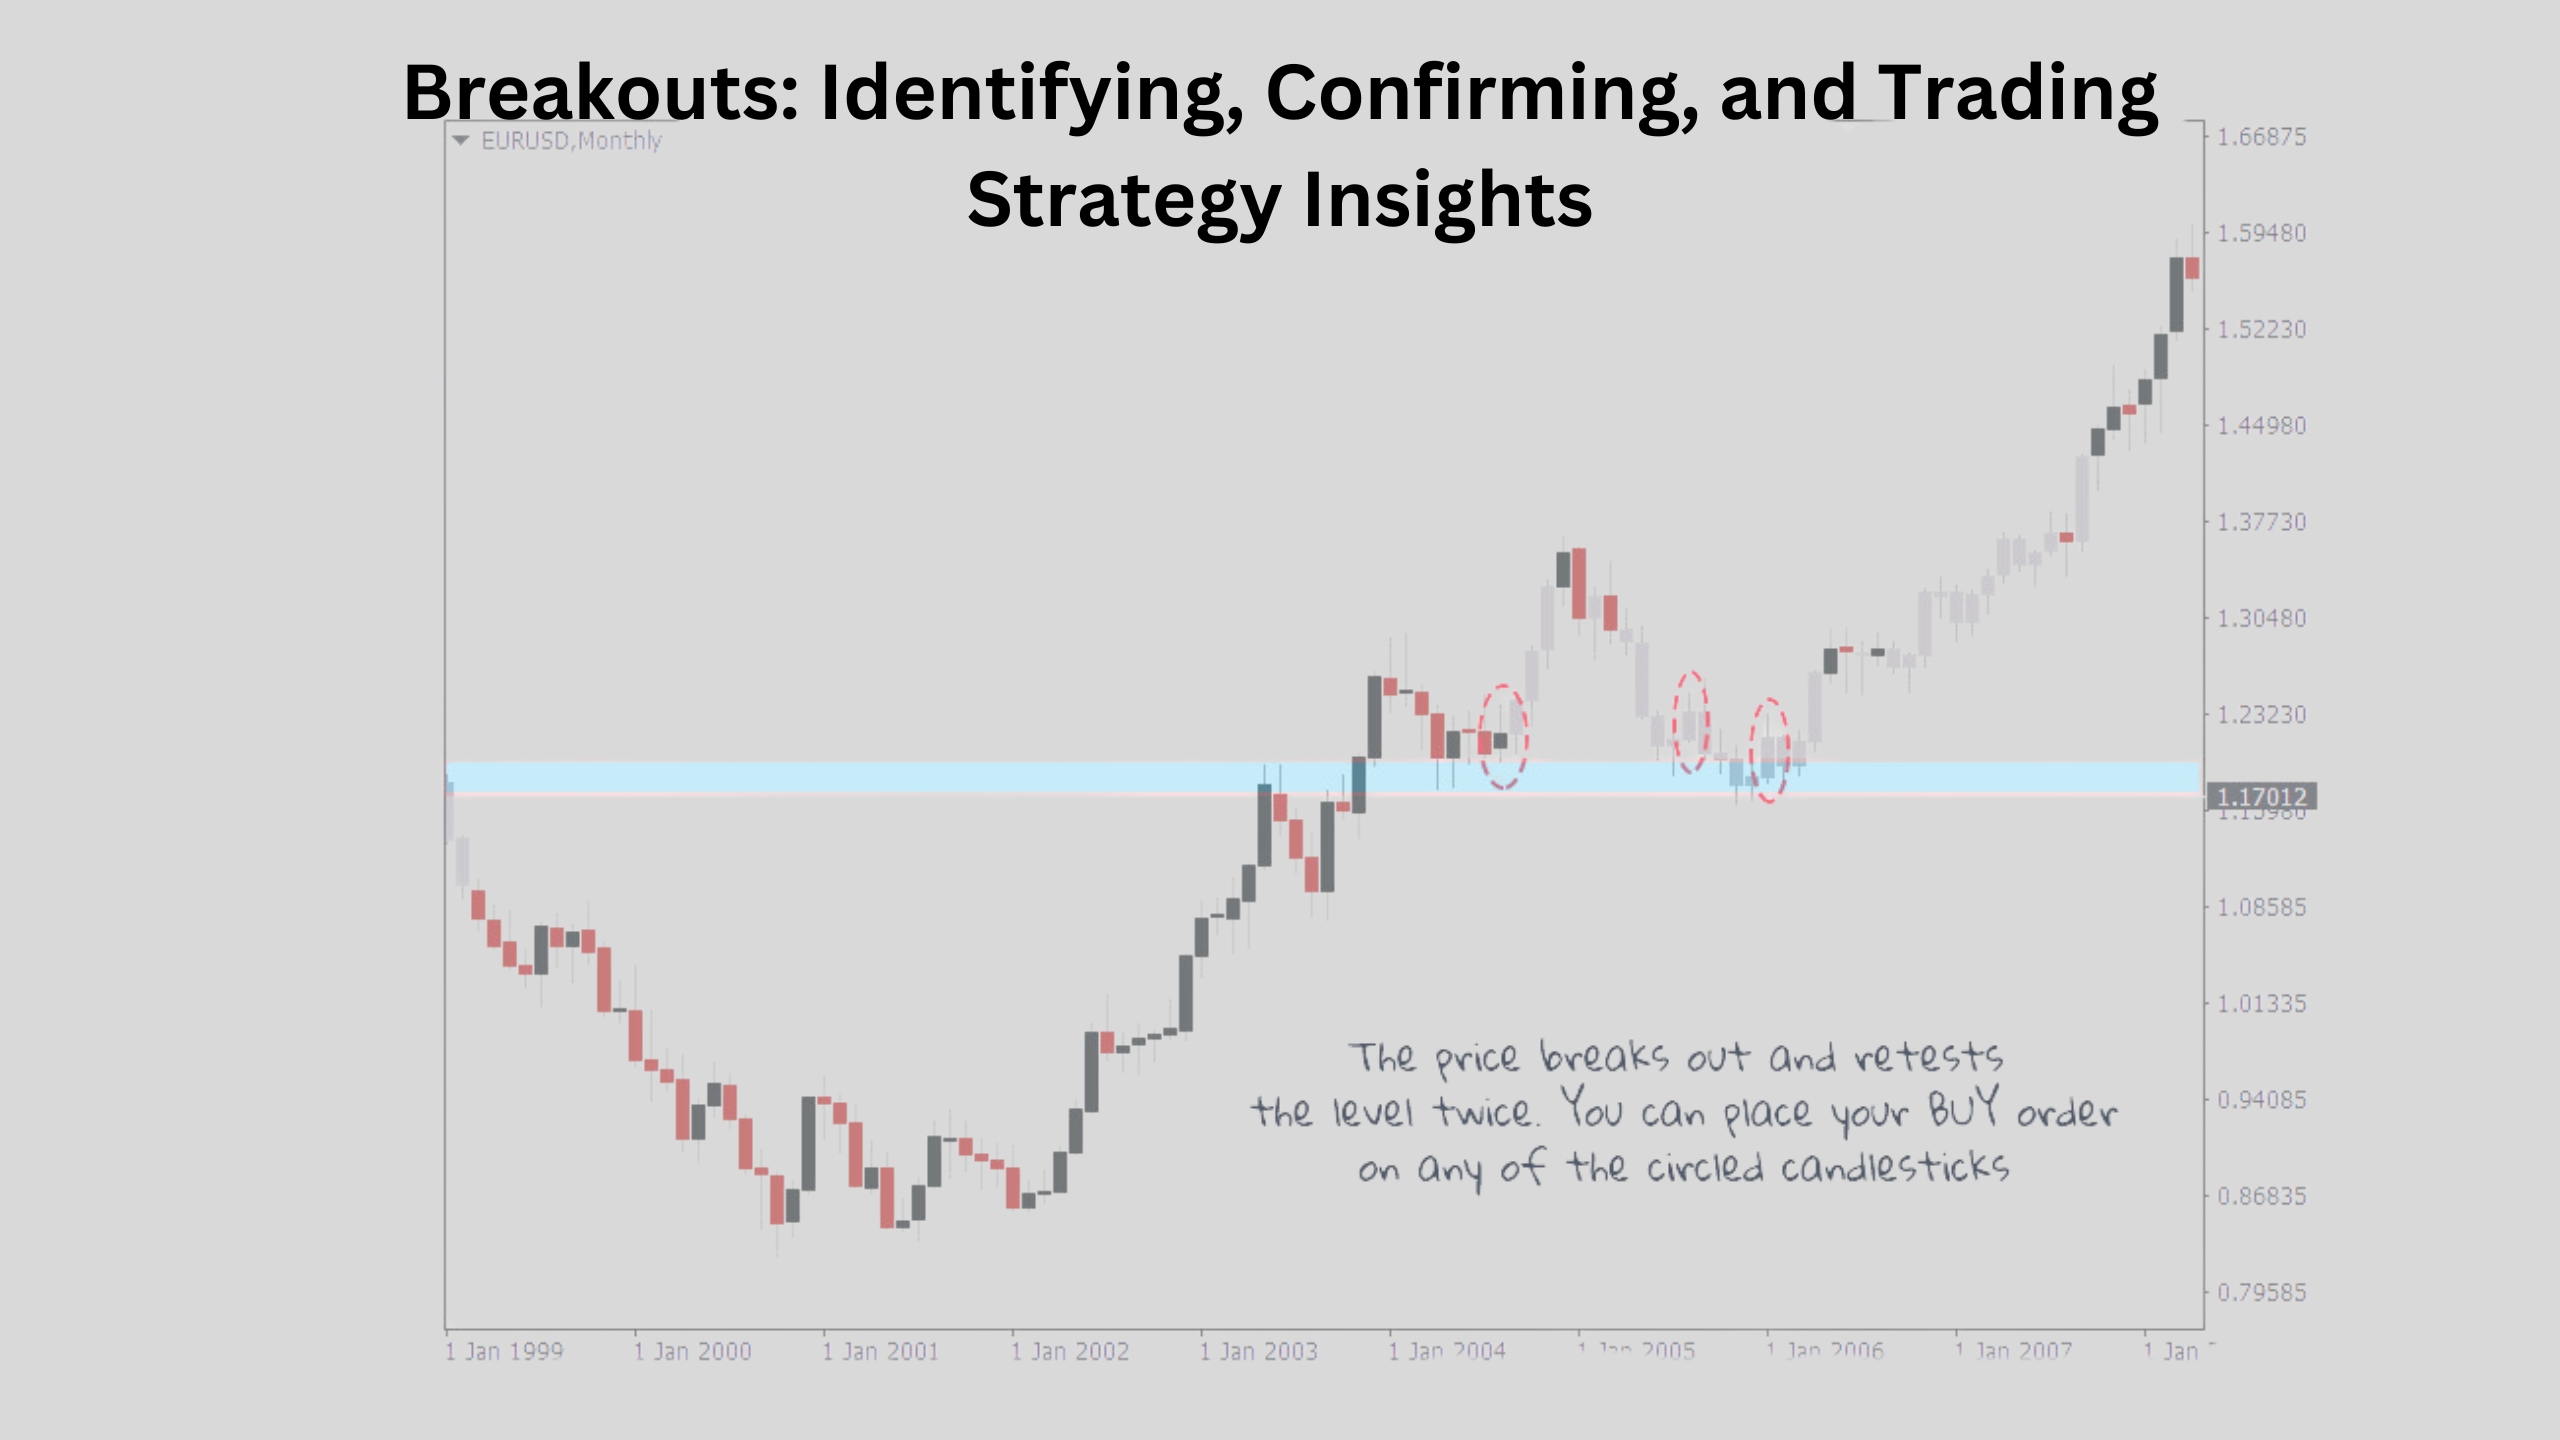 Breakouts Identifying, Confirming, and Trading Strategy Insights